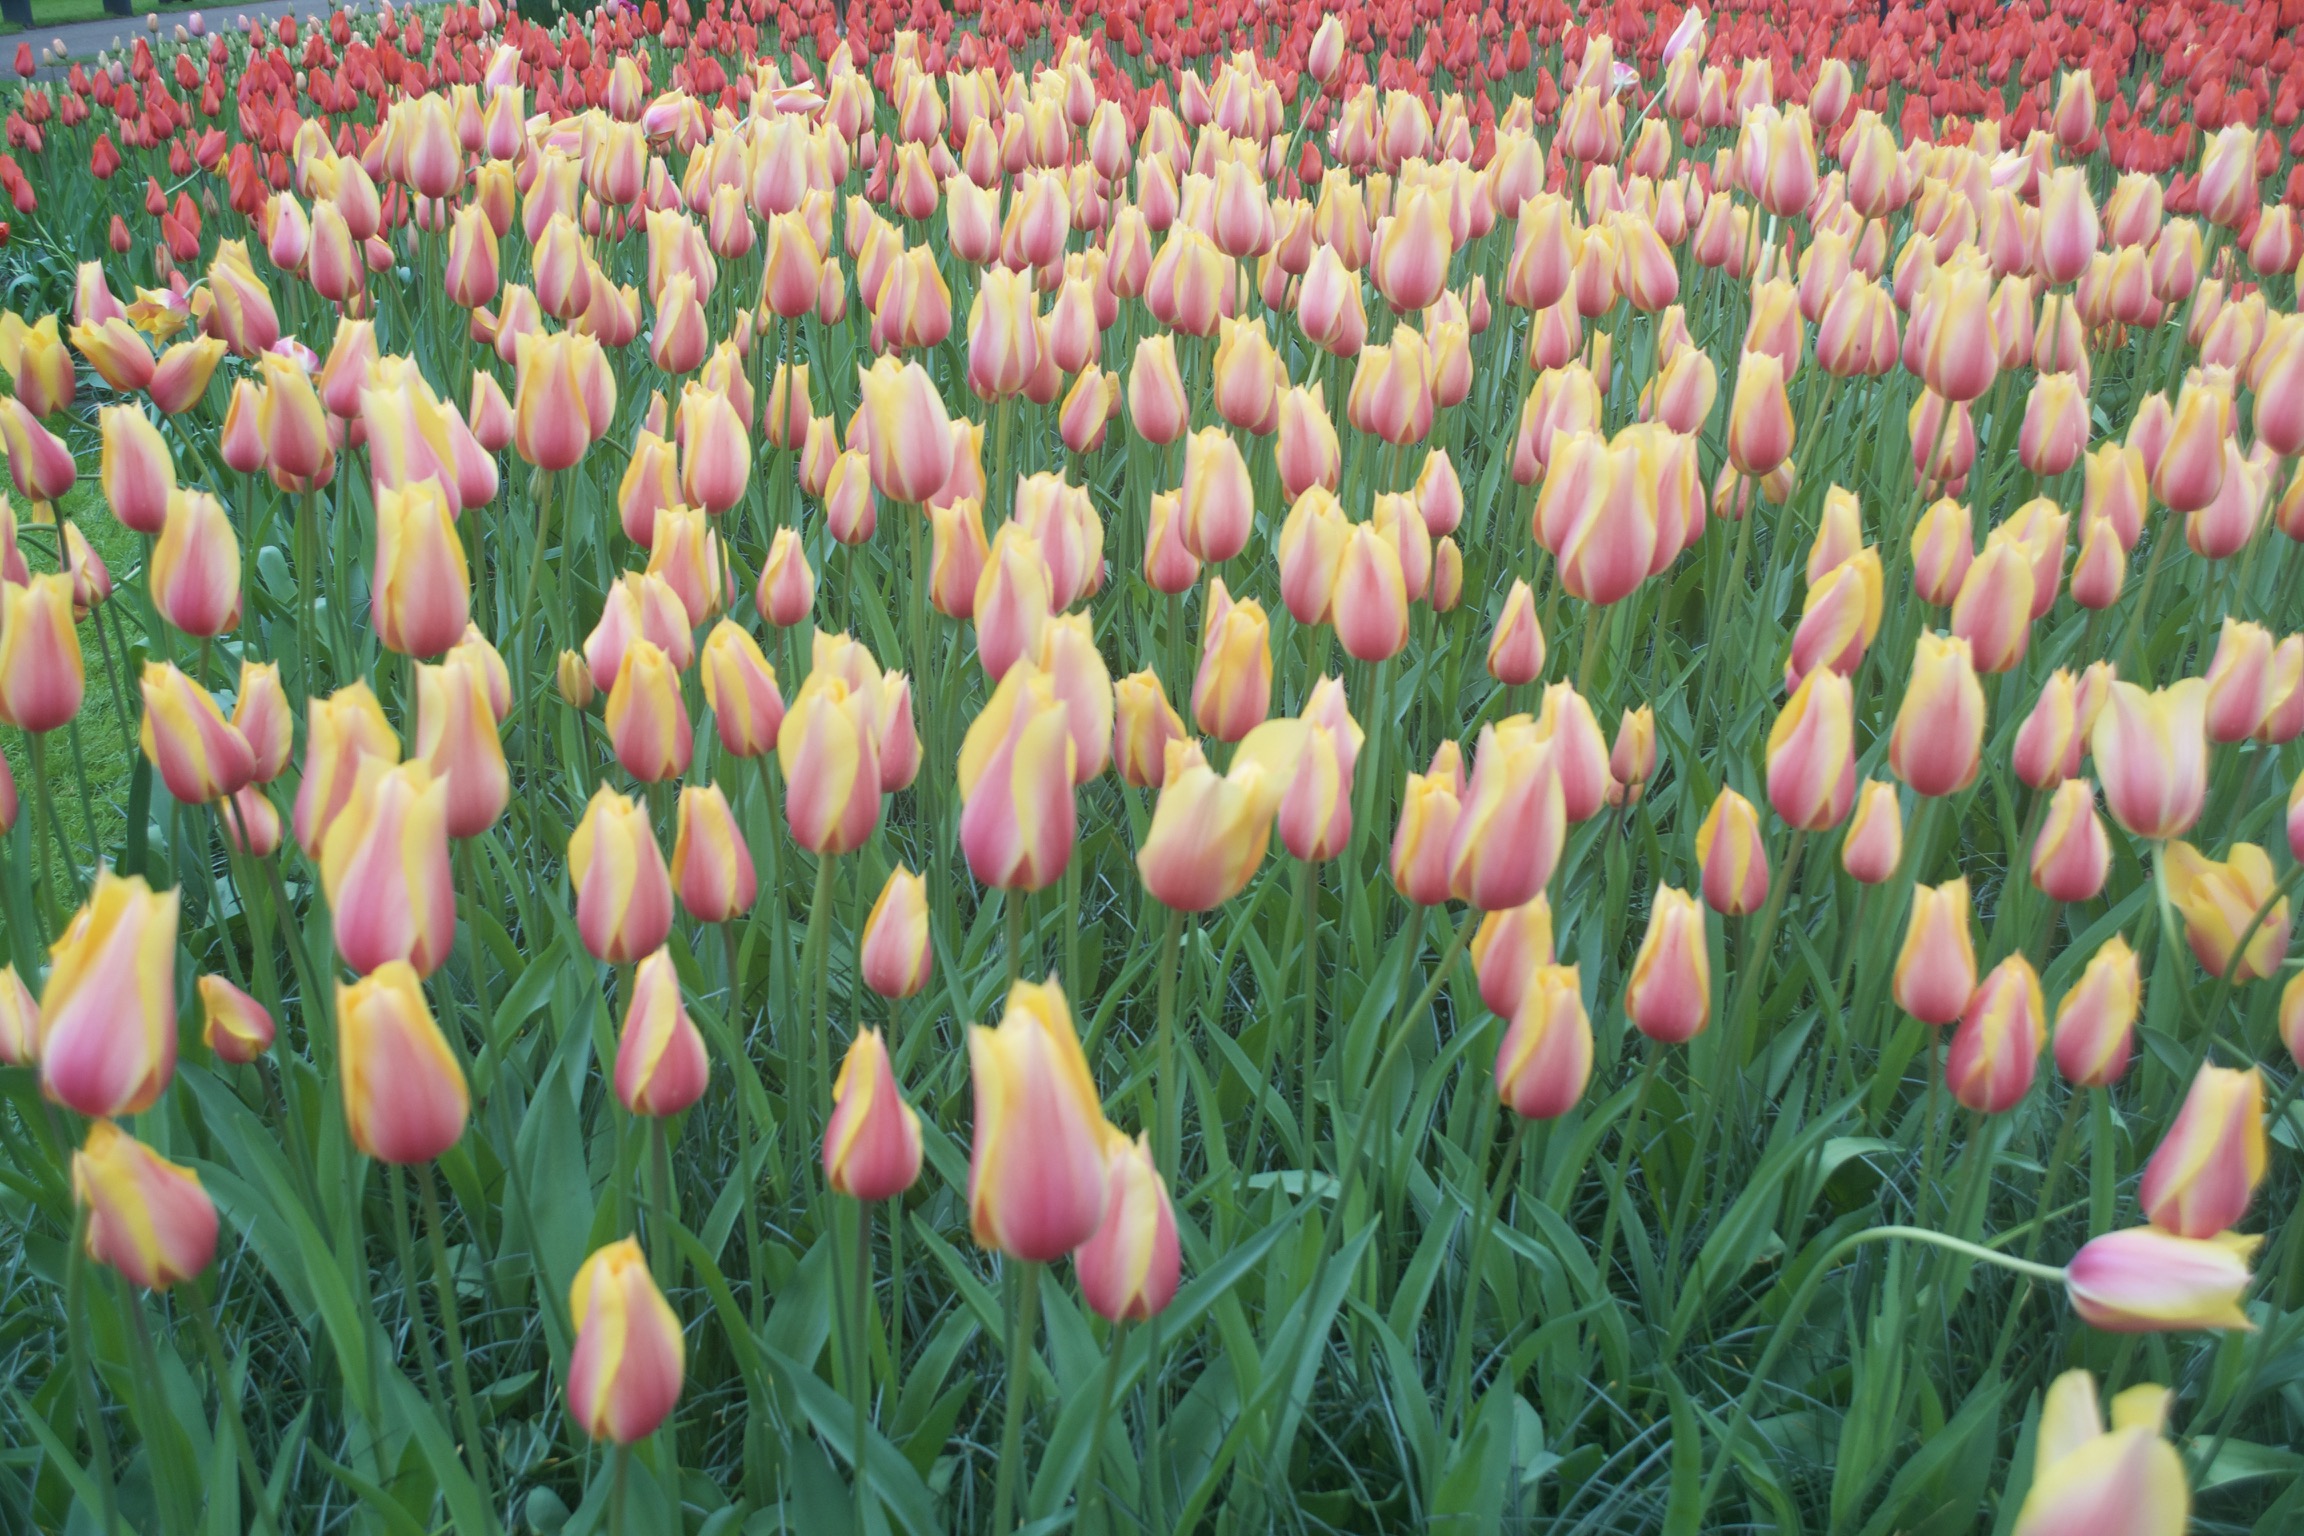 Many yellow and pink tulips.